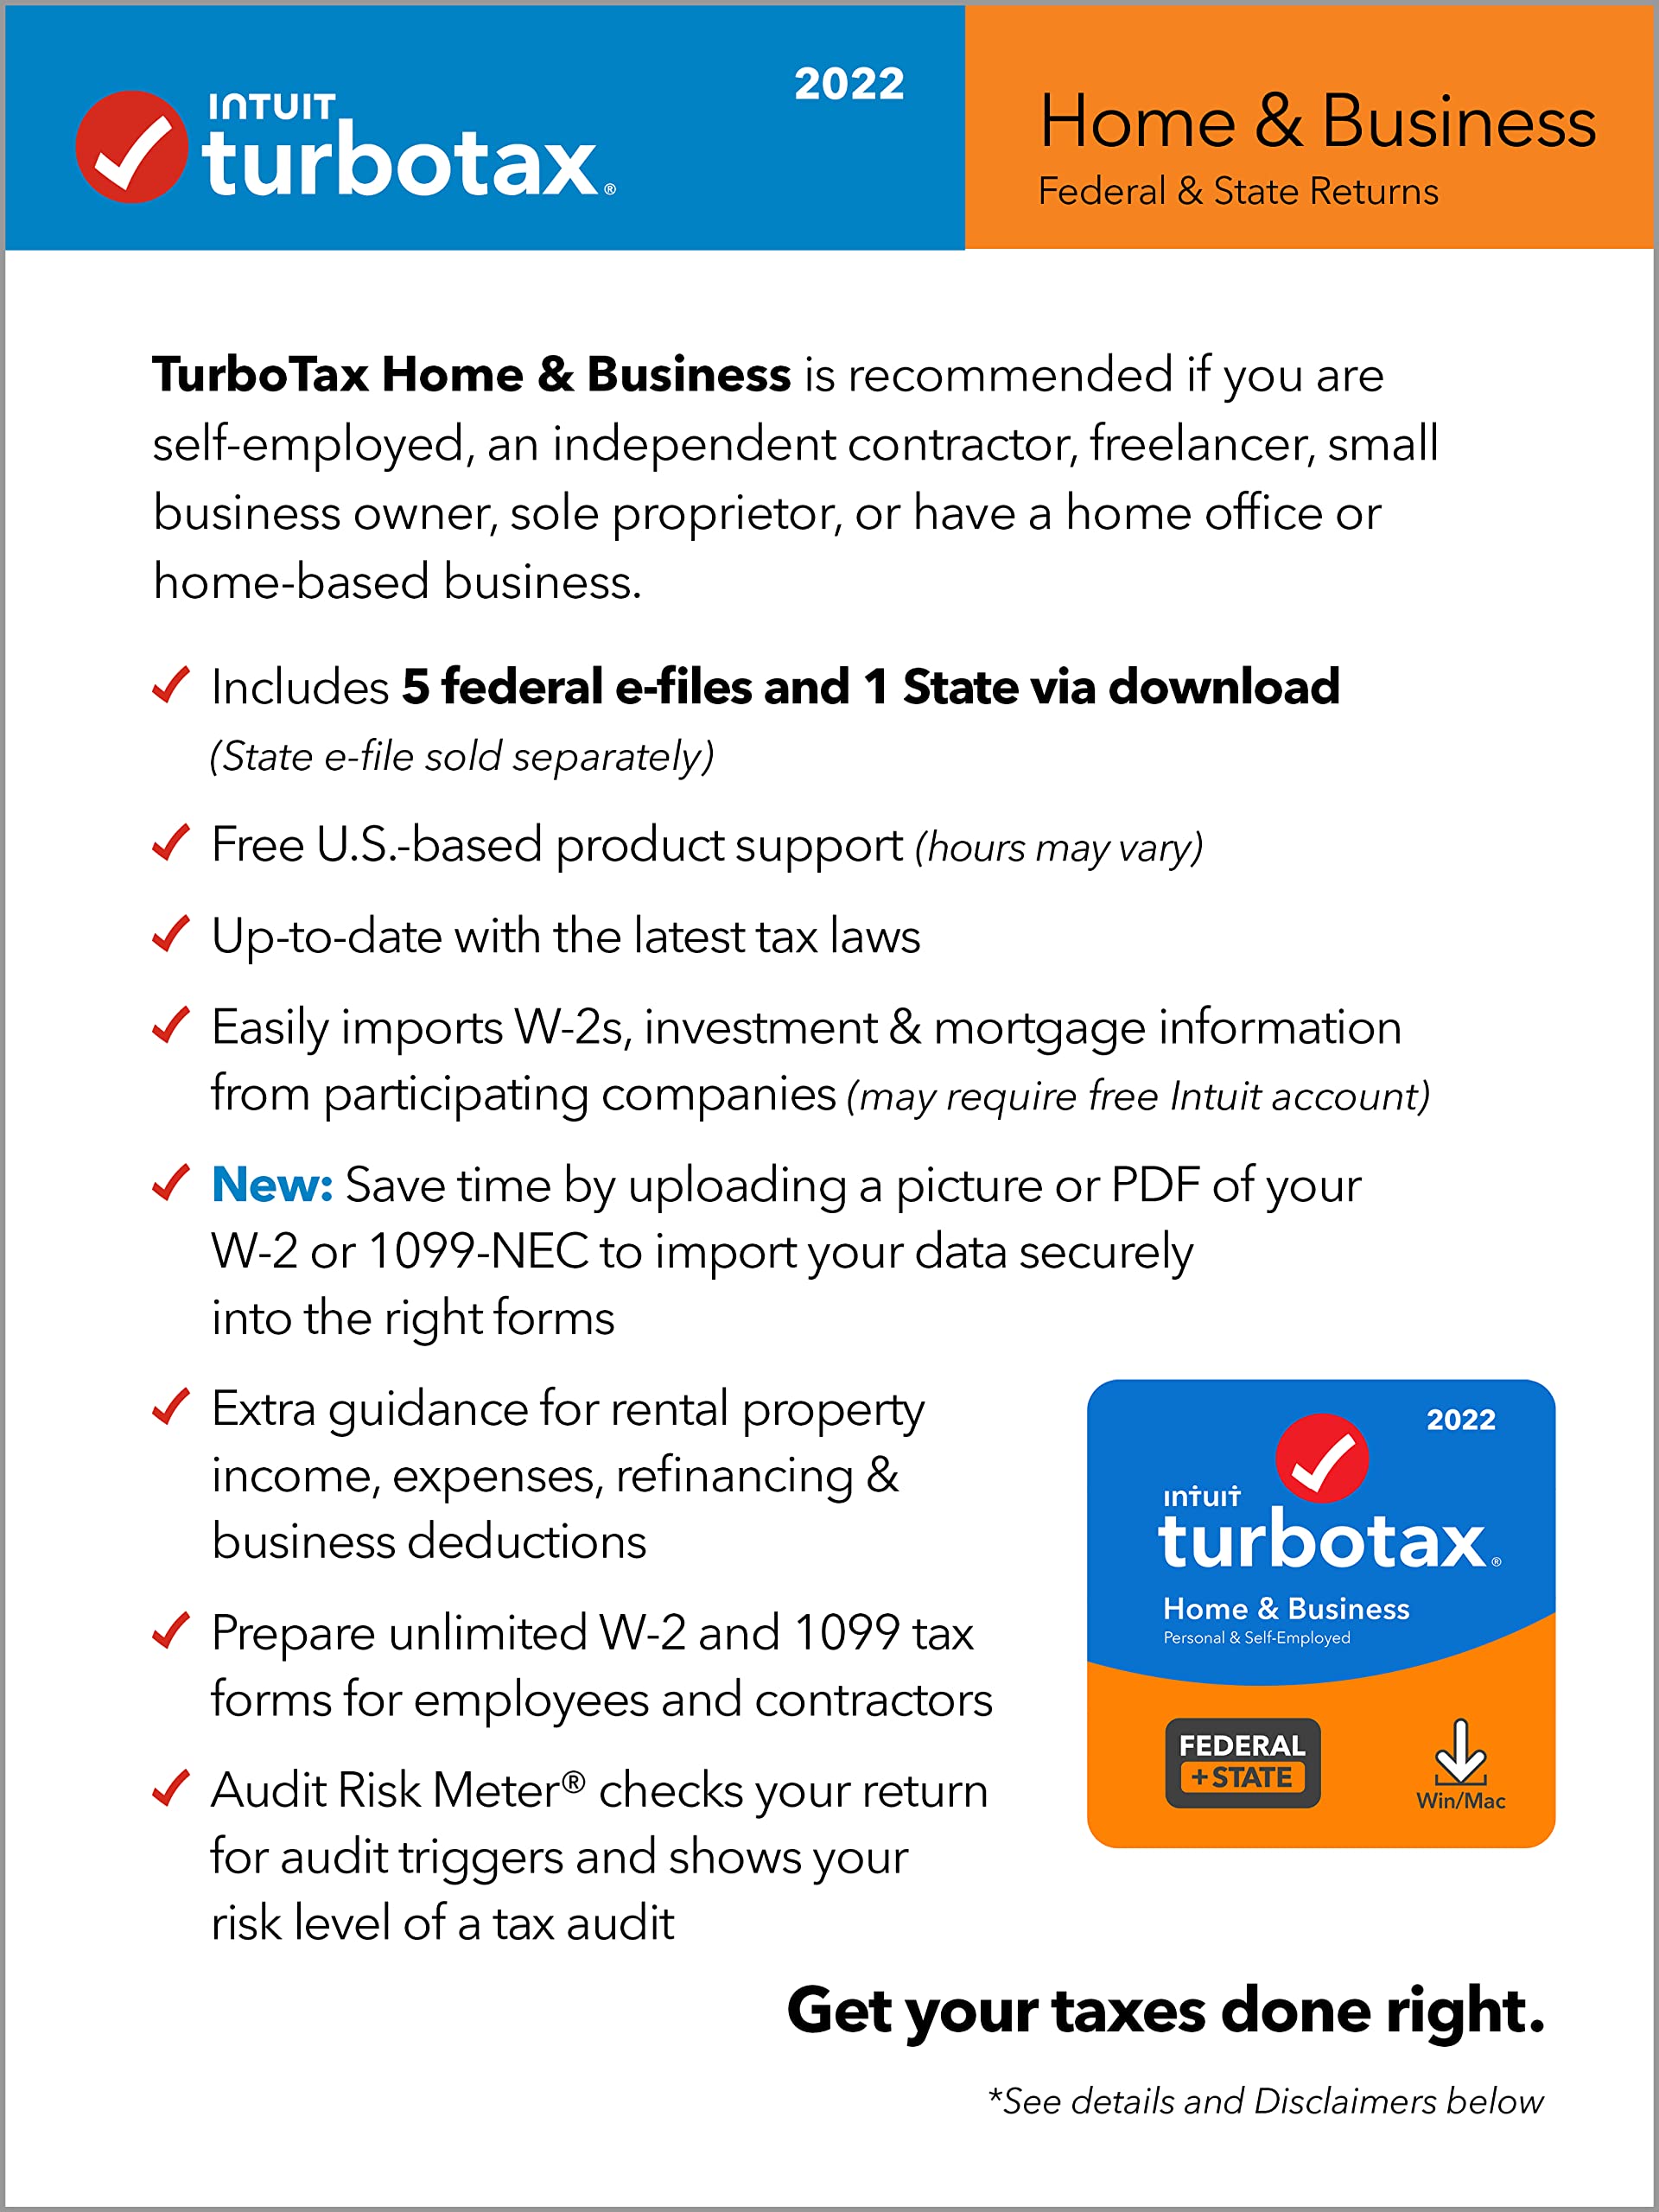 [Old Version] TurboTax Home & Business 2022 Tax Software, Federal and State Tax Return, [Amazon Exclusive] [PC/MAC Download]